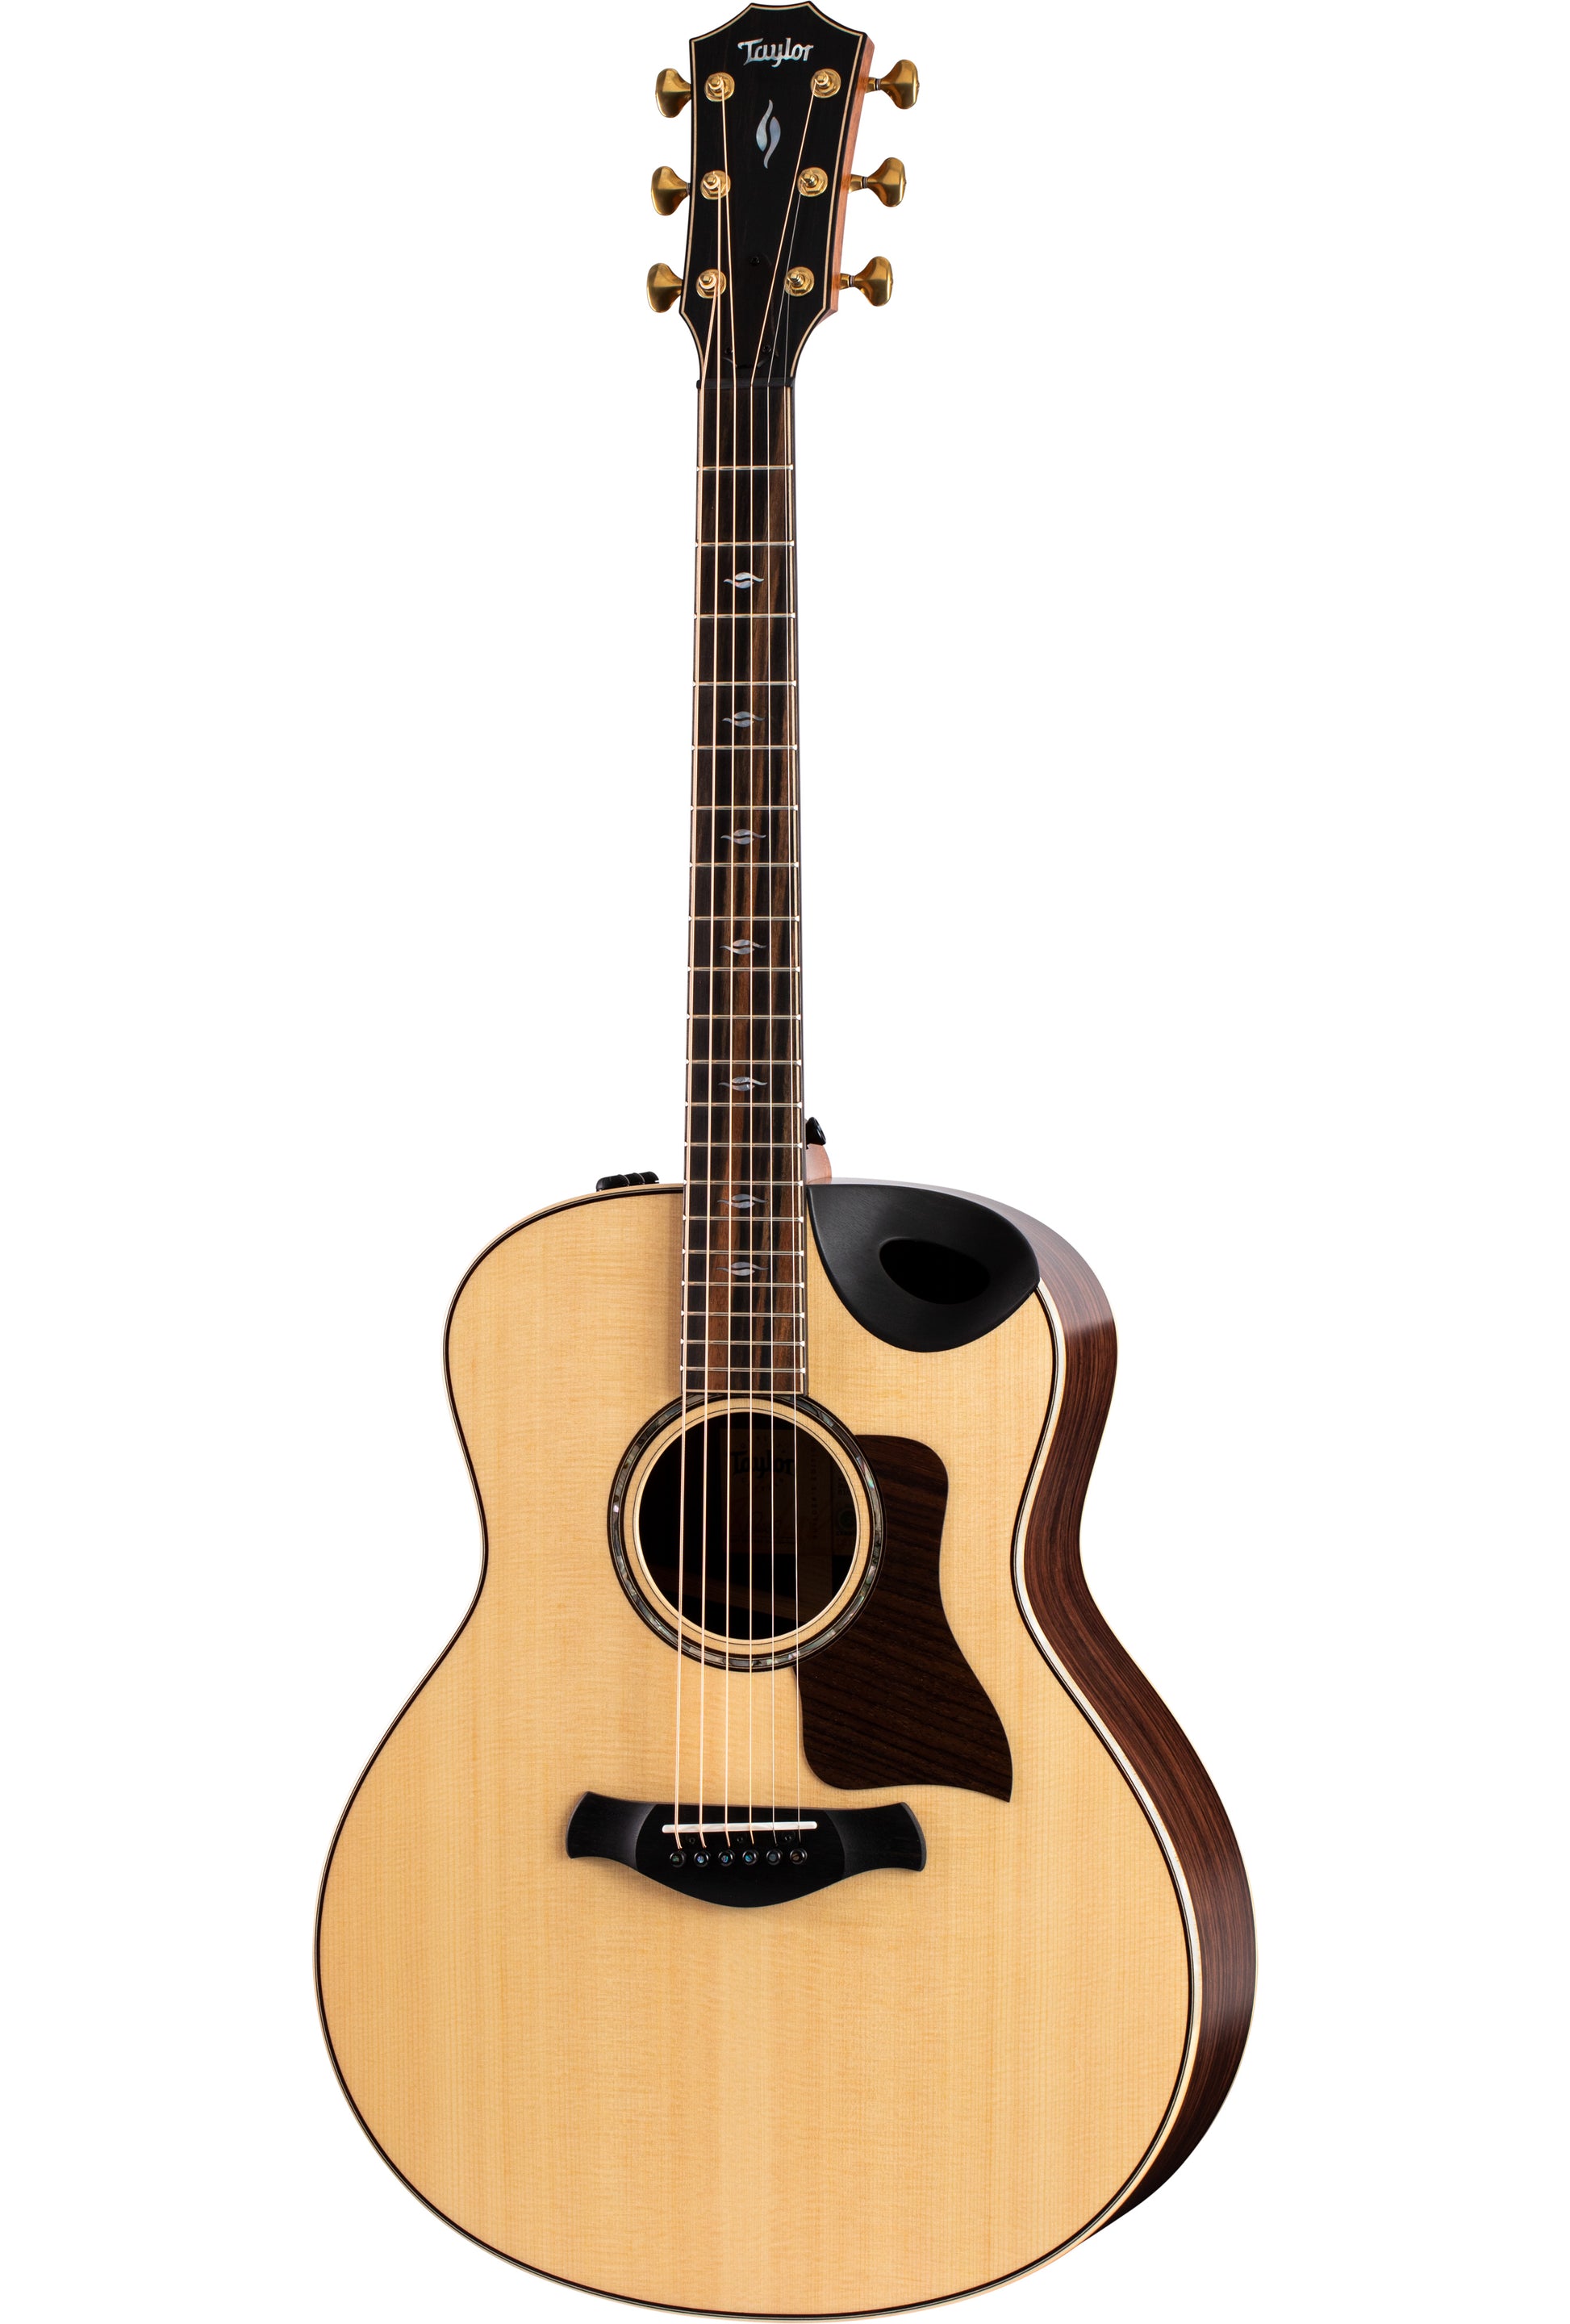 Full view of Taylor Builder’s Edition 816ce V-Class Bracing w/case